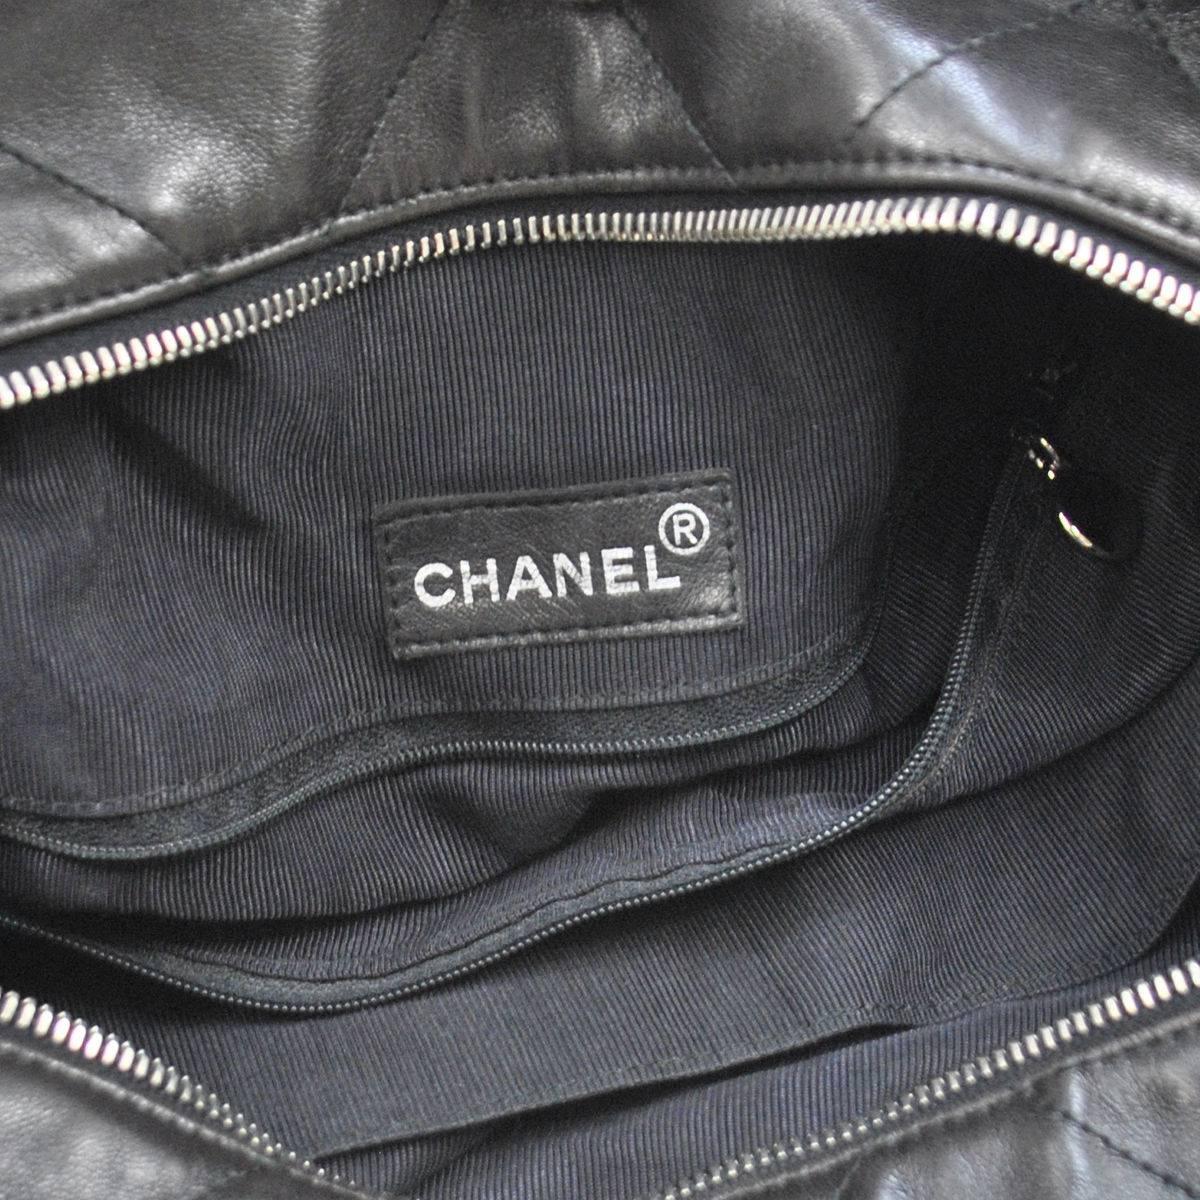 Chanel Black Leather Large Carryall Travel Top Handle Tote Bag 4